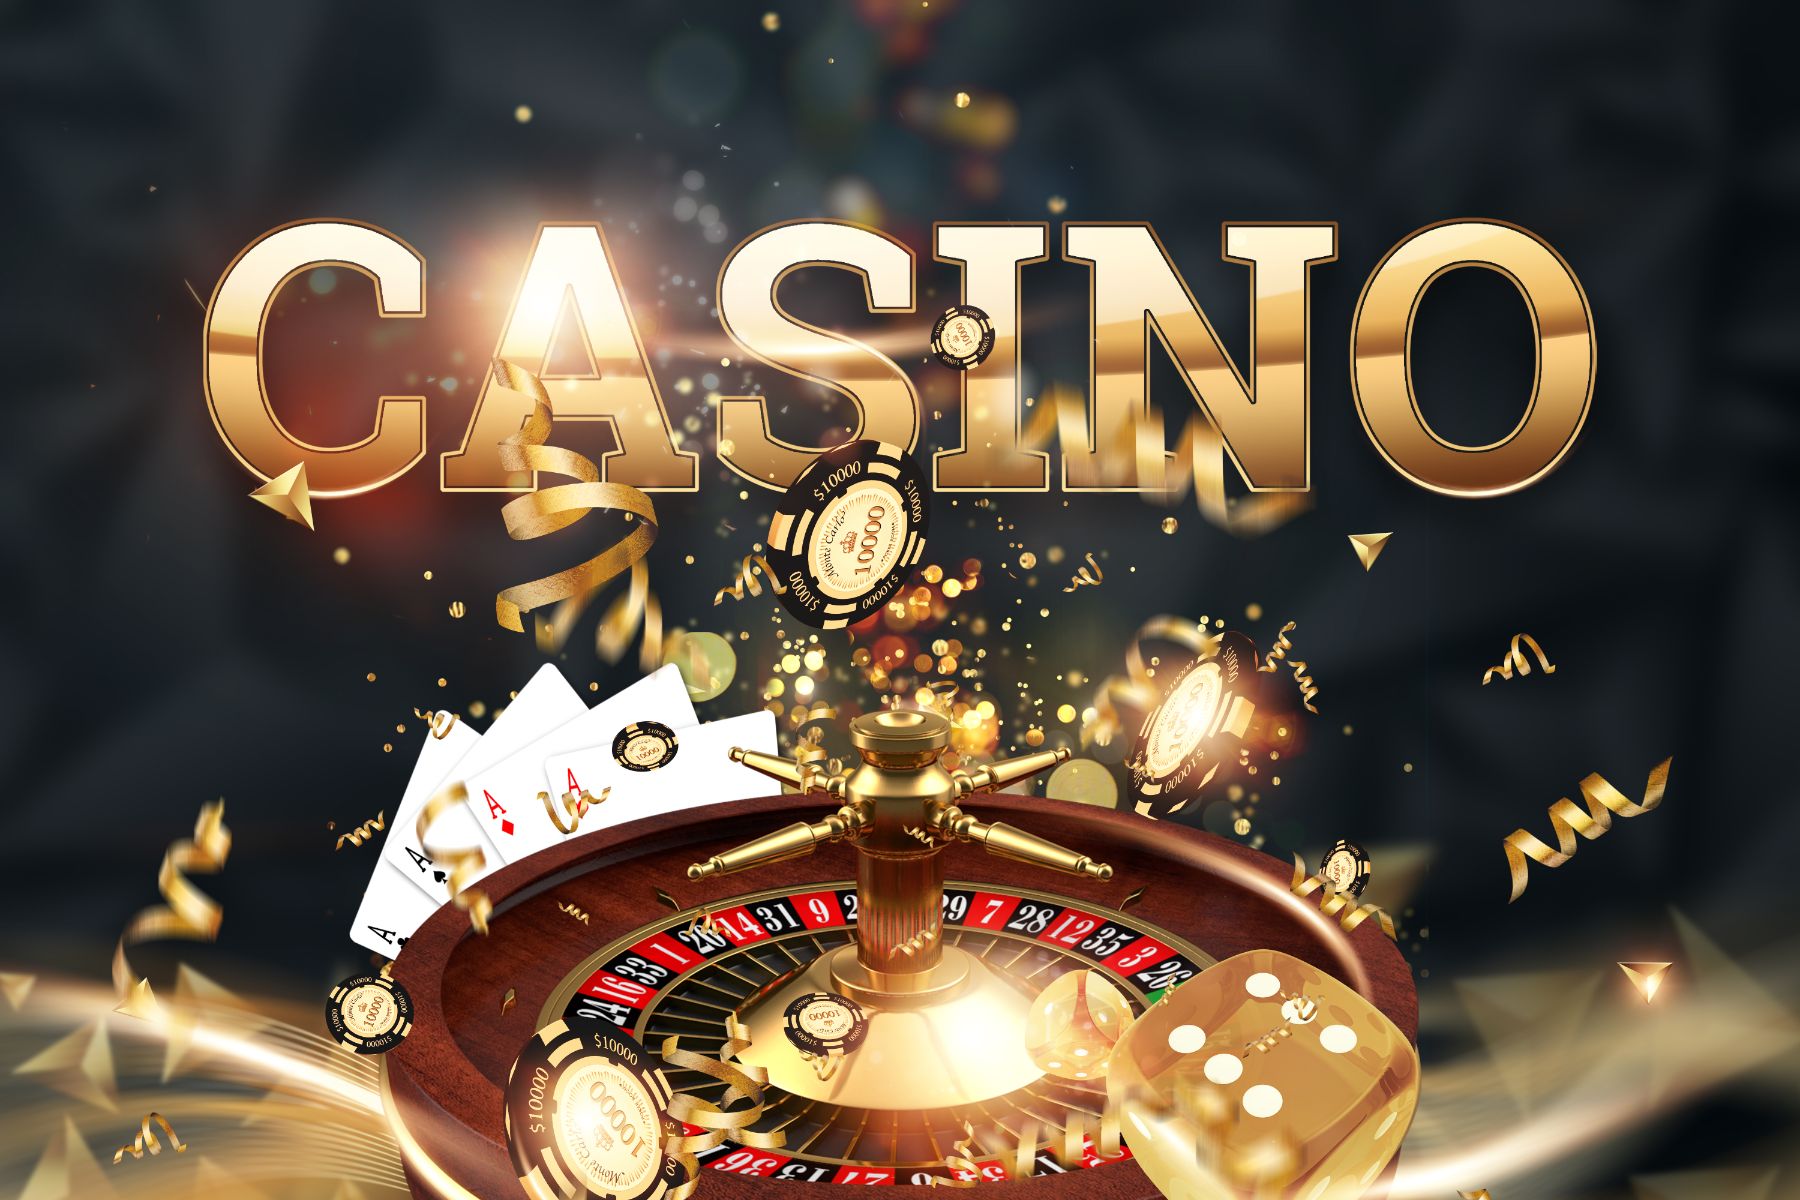 Top Pay By Mobile Online Casino Gaming